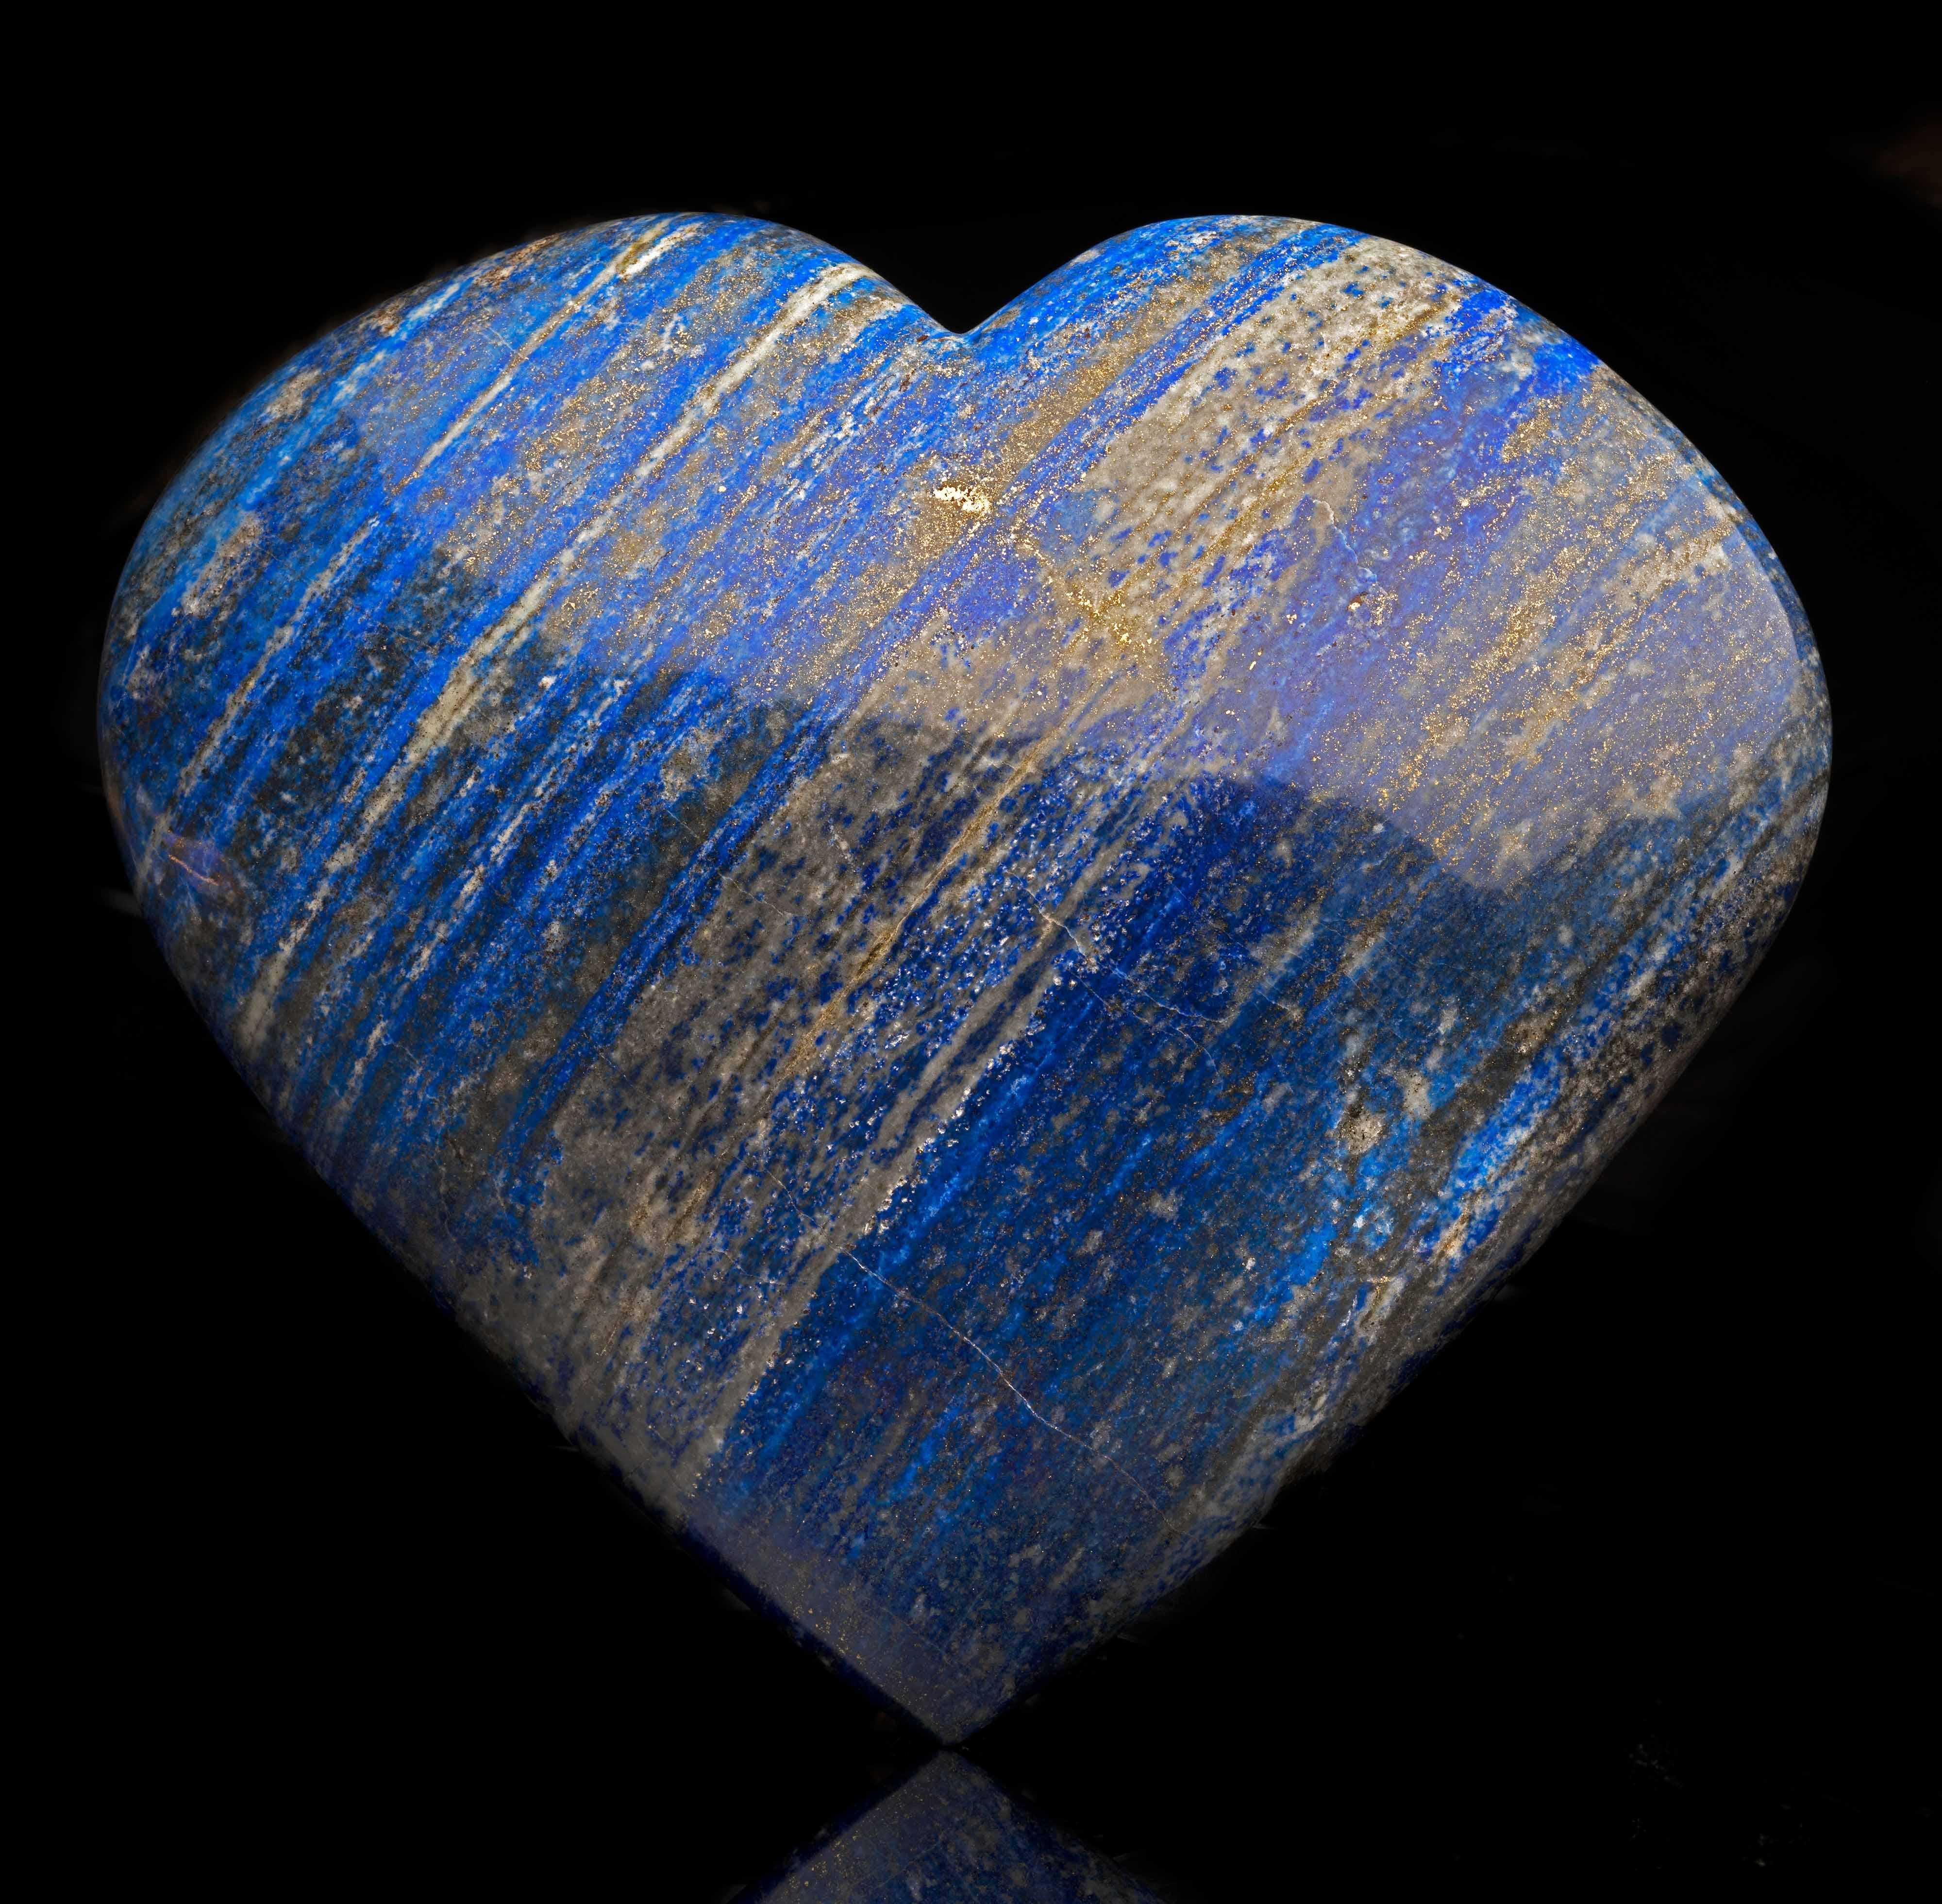 This huge heart from Afghanistan has been hand-carved and hand-polished out of one piece of genuine, beautiful color lapis lazuli featuring the shimmer of pyrite deposits and bands of white calcite which contrast beautifully with the royal blue base